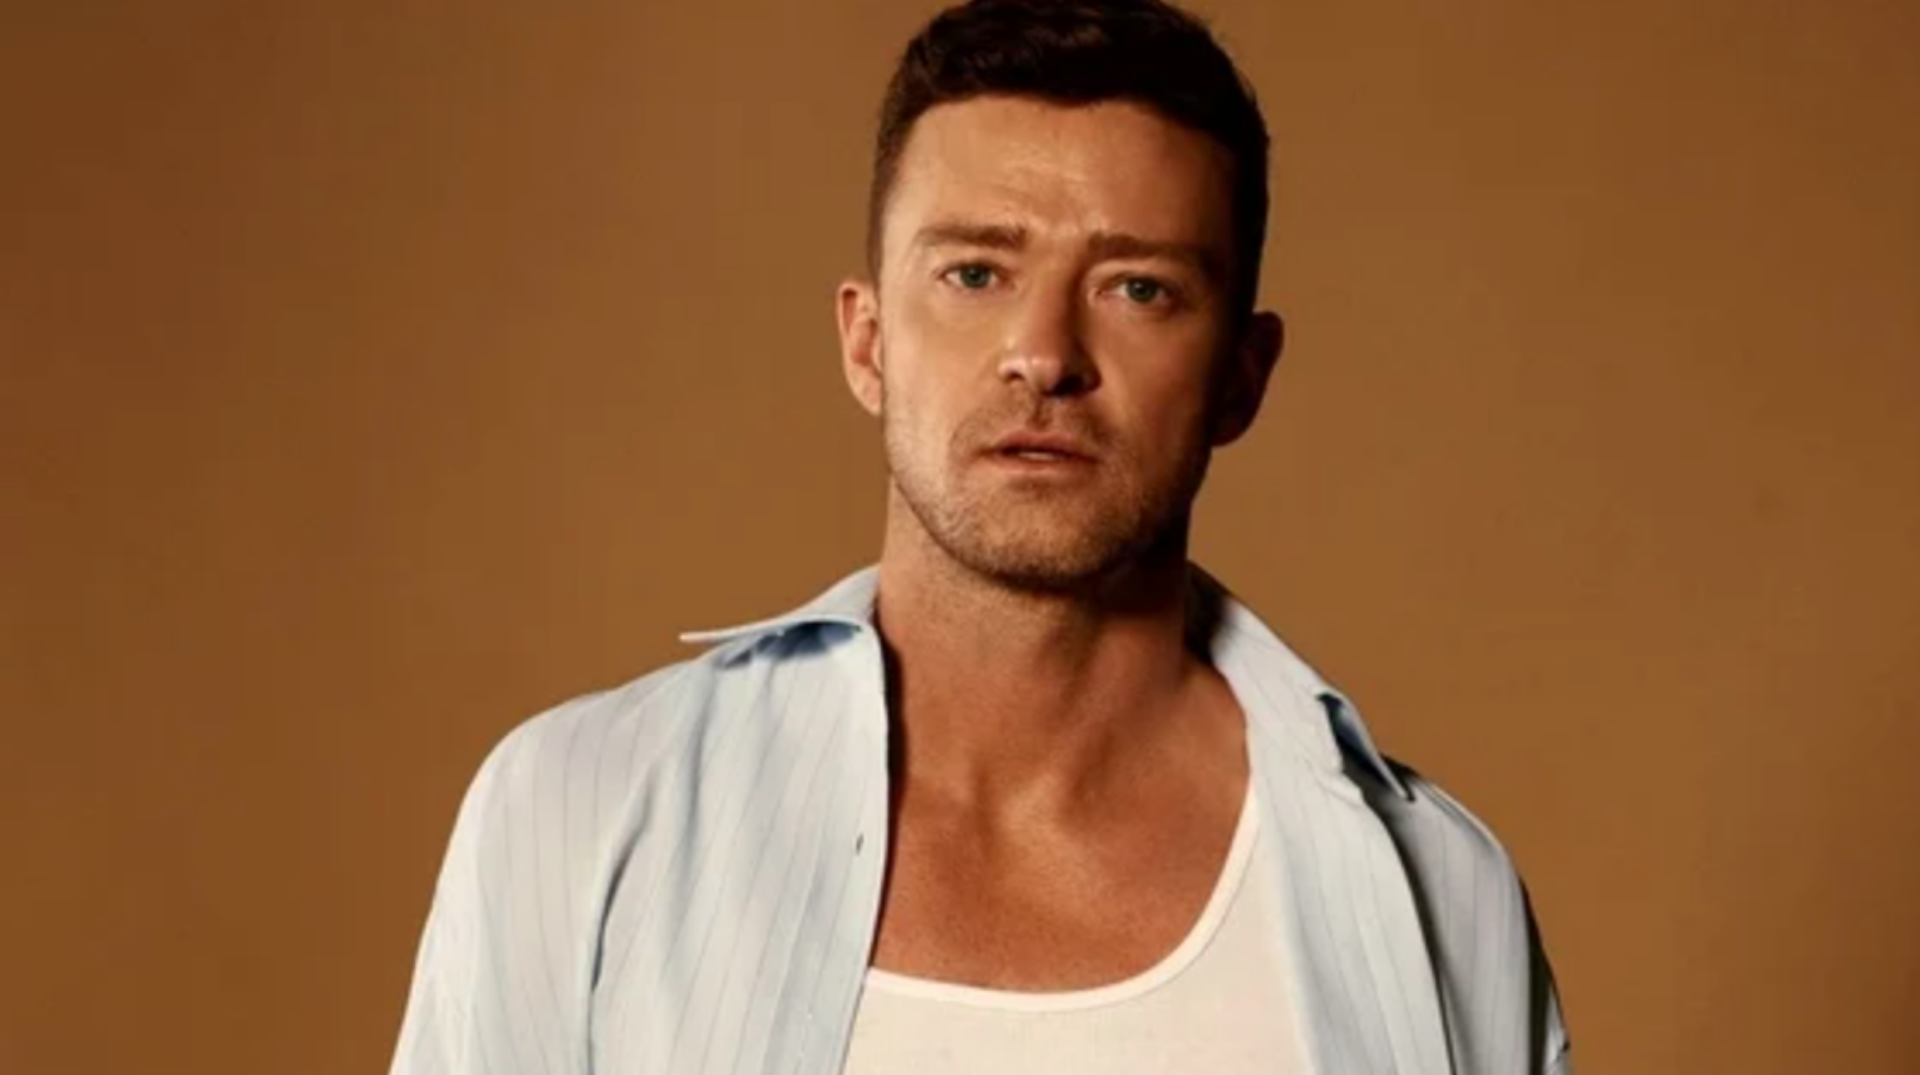 Justin Timberlake is preparing for the drop of his new album Everything I Thought It Was by releasing the track 